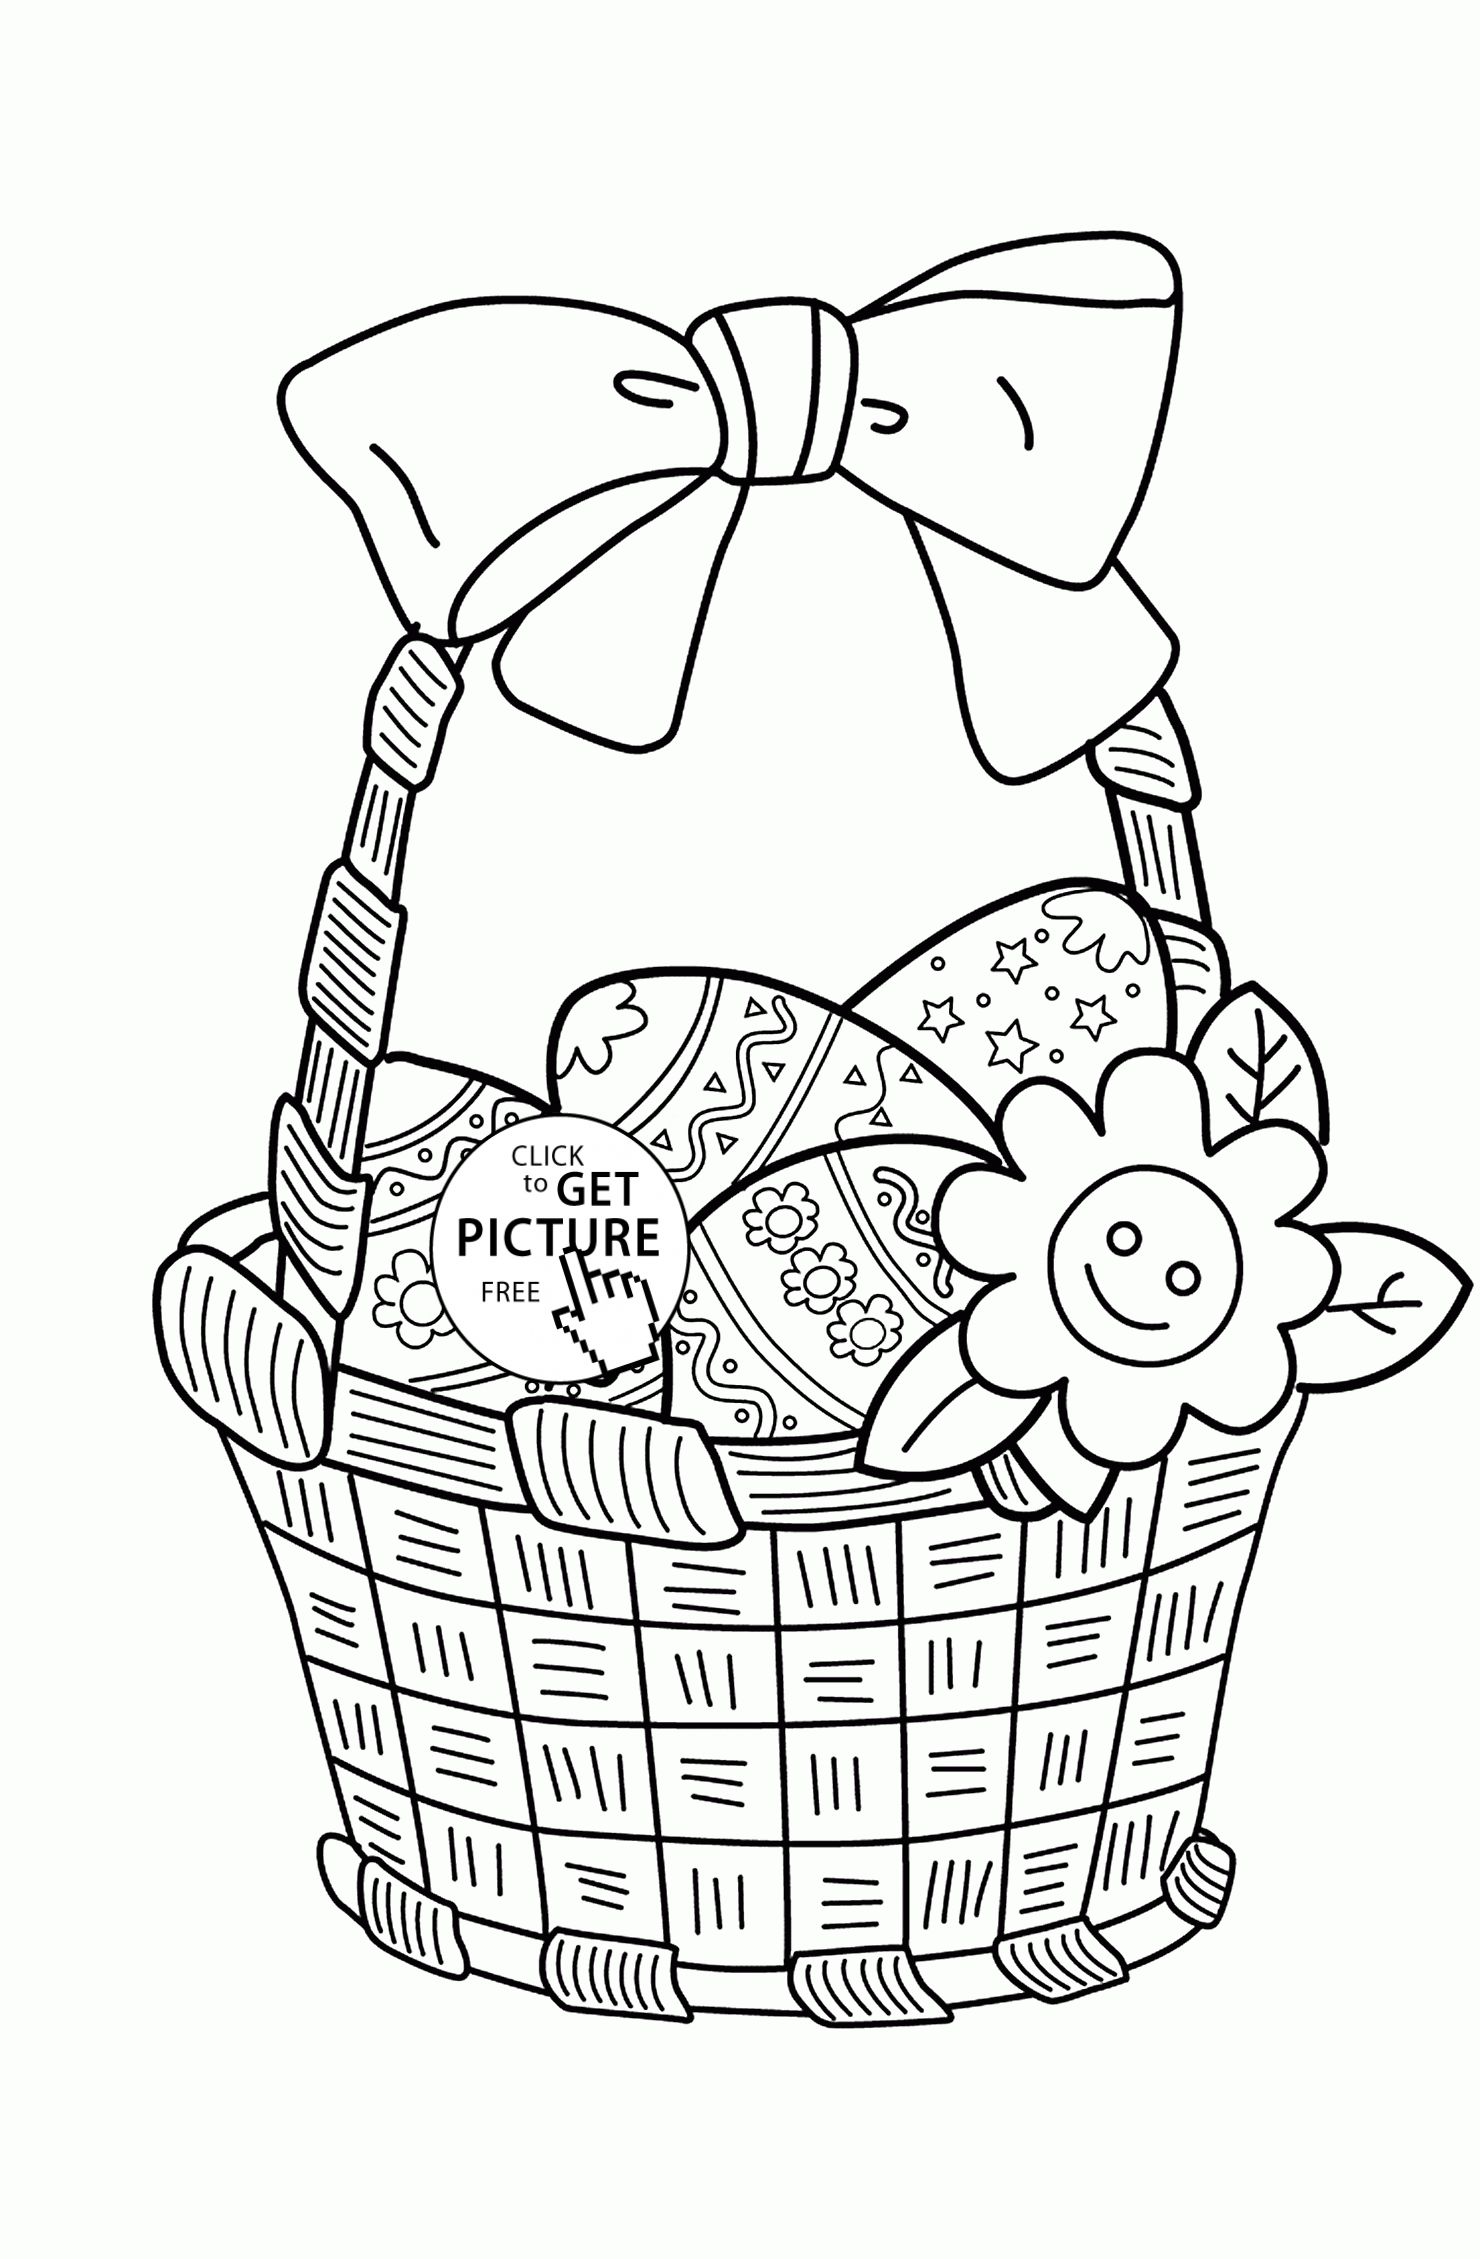 Easter Basket Coloring Pages - Part 3